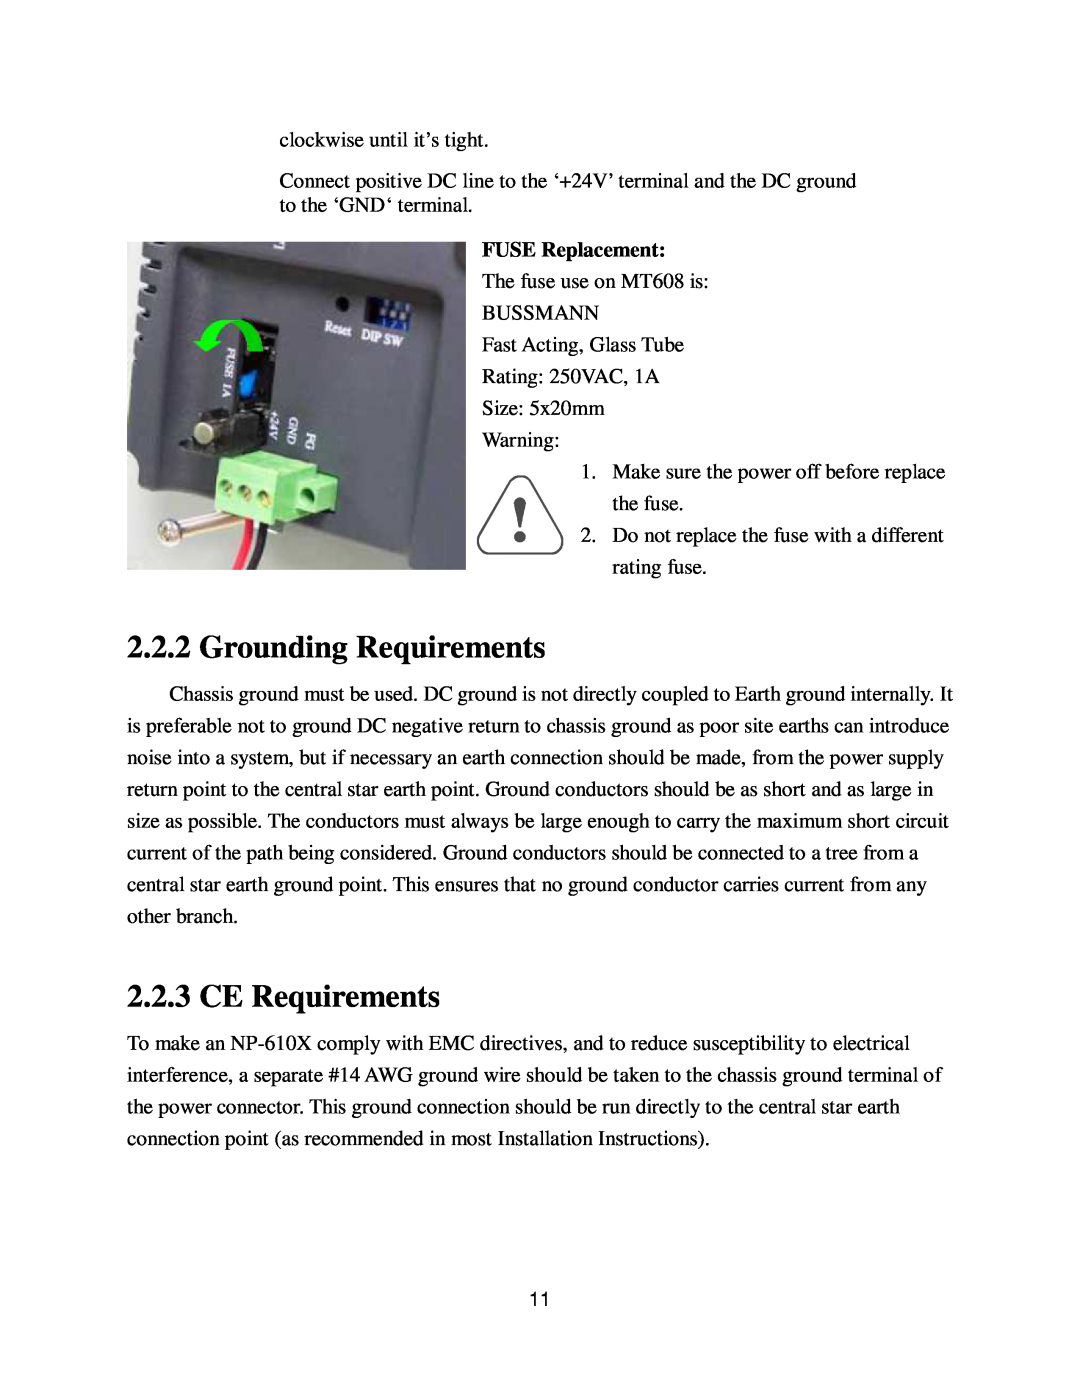 Nextar NP-610X user manual Grounding Requirements, CE Requirements, FUSE Replacement 